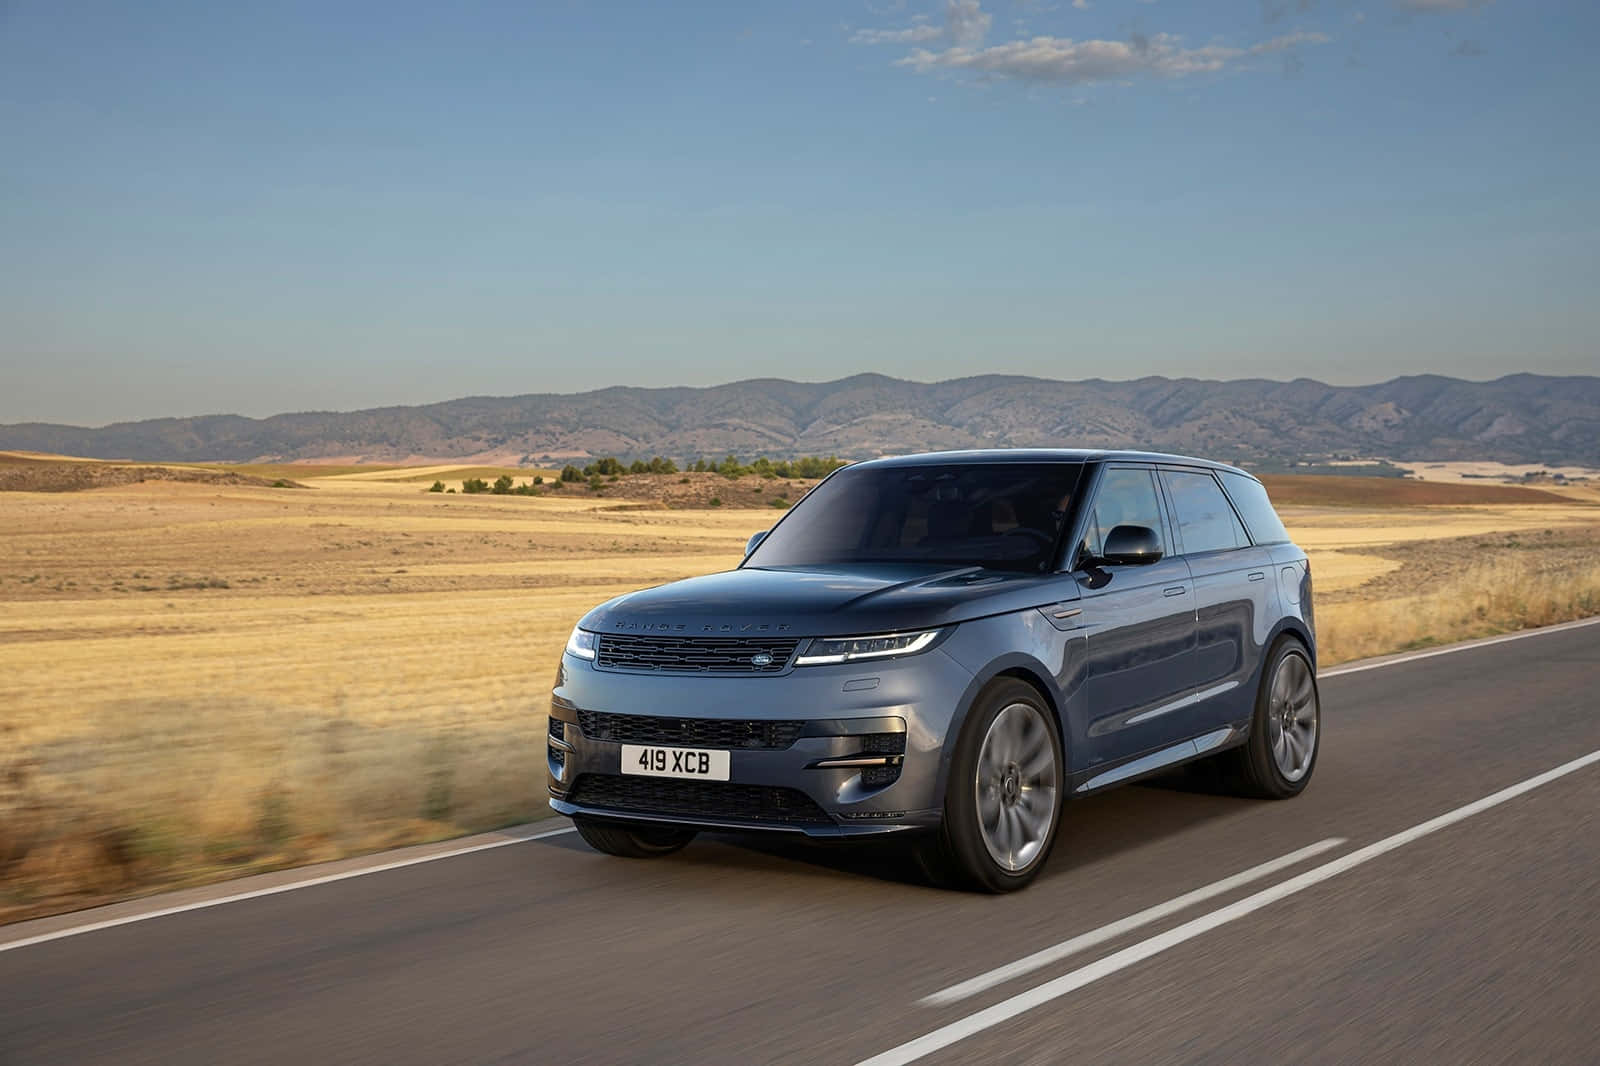 The Range Rover Evoque Is Driving Down A Country Road